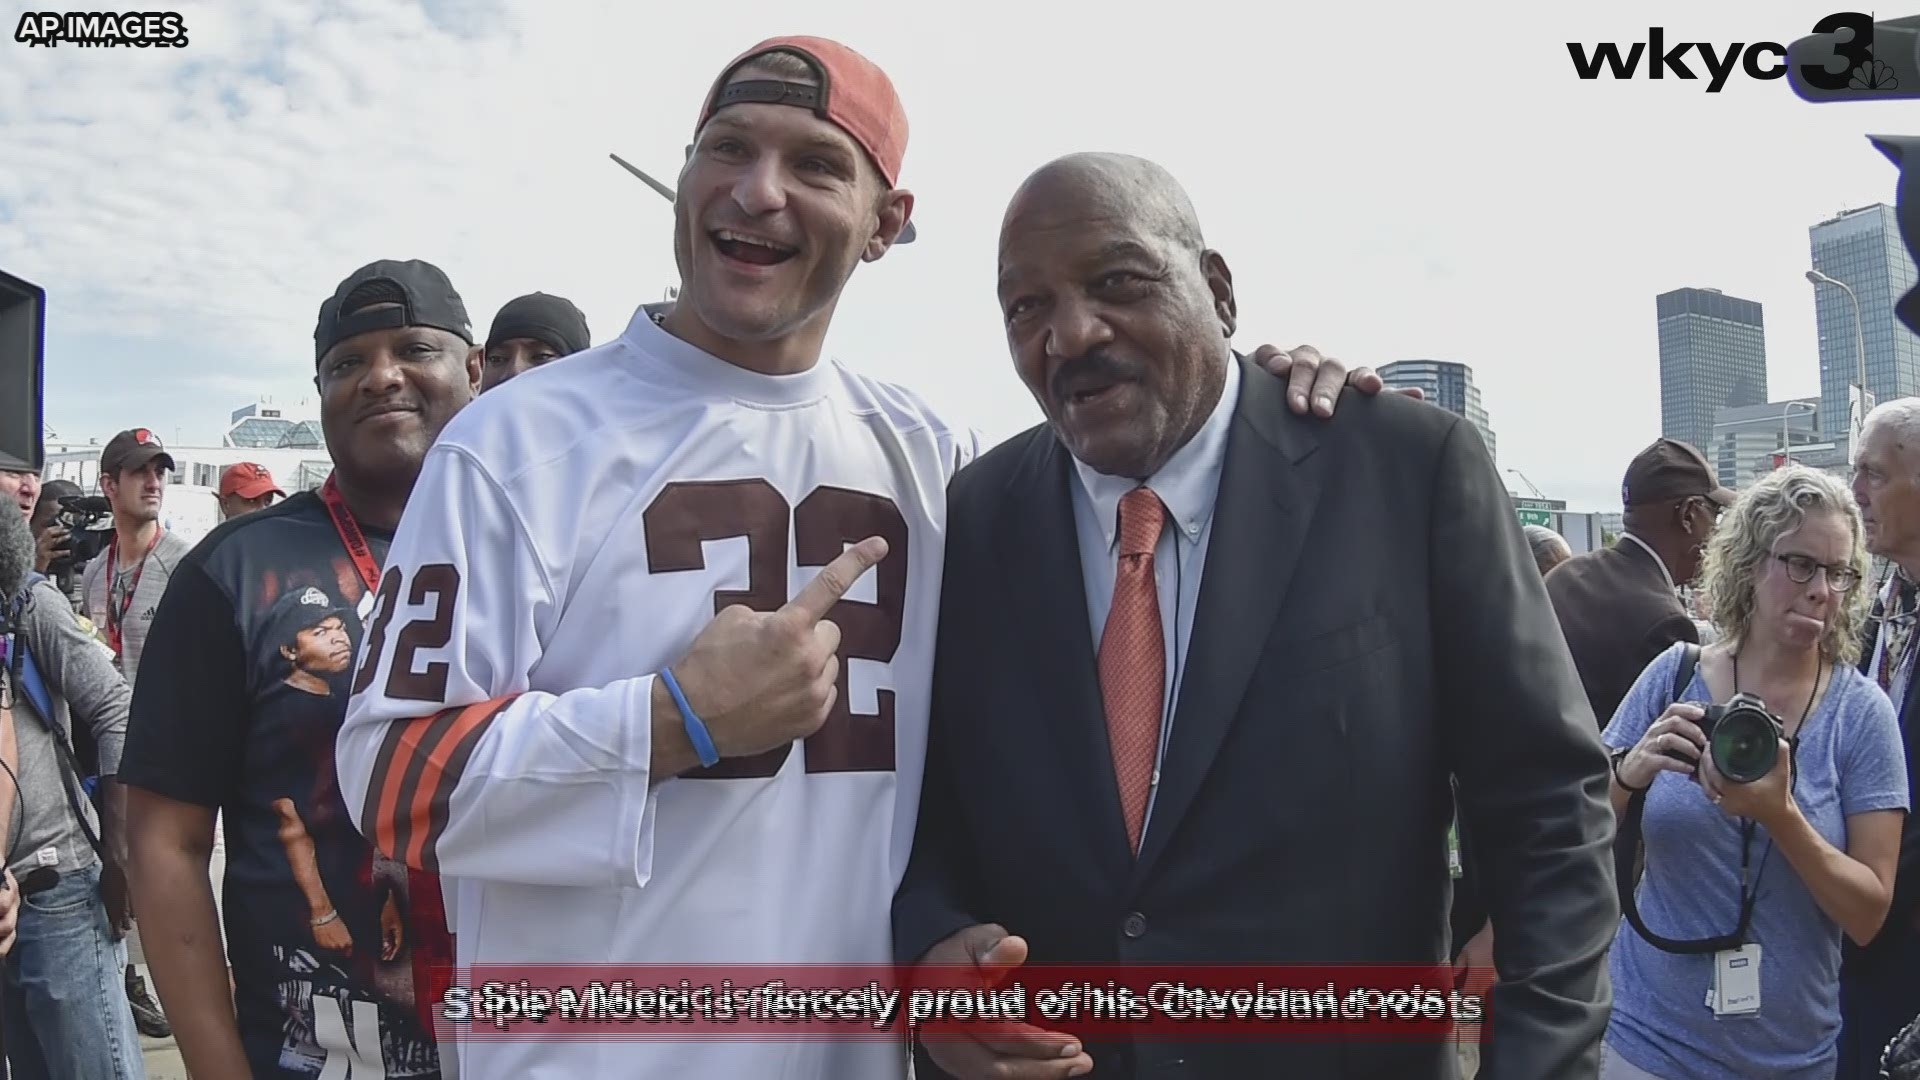 In an Instagram post, UFC contender Stipe Miocic congratulated Cleveland on a job well done hosting the 2019 MLB All-Star Game.